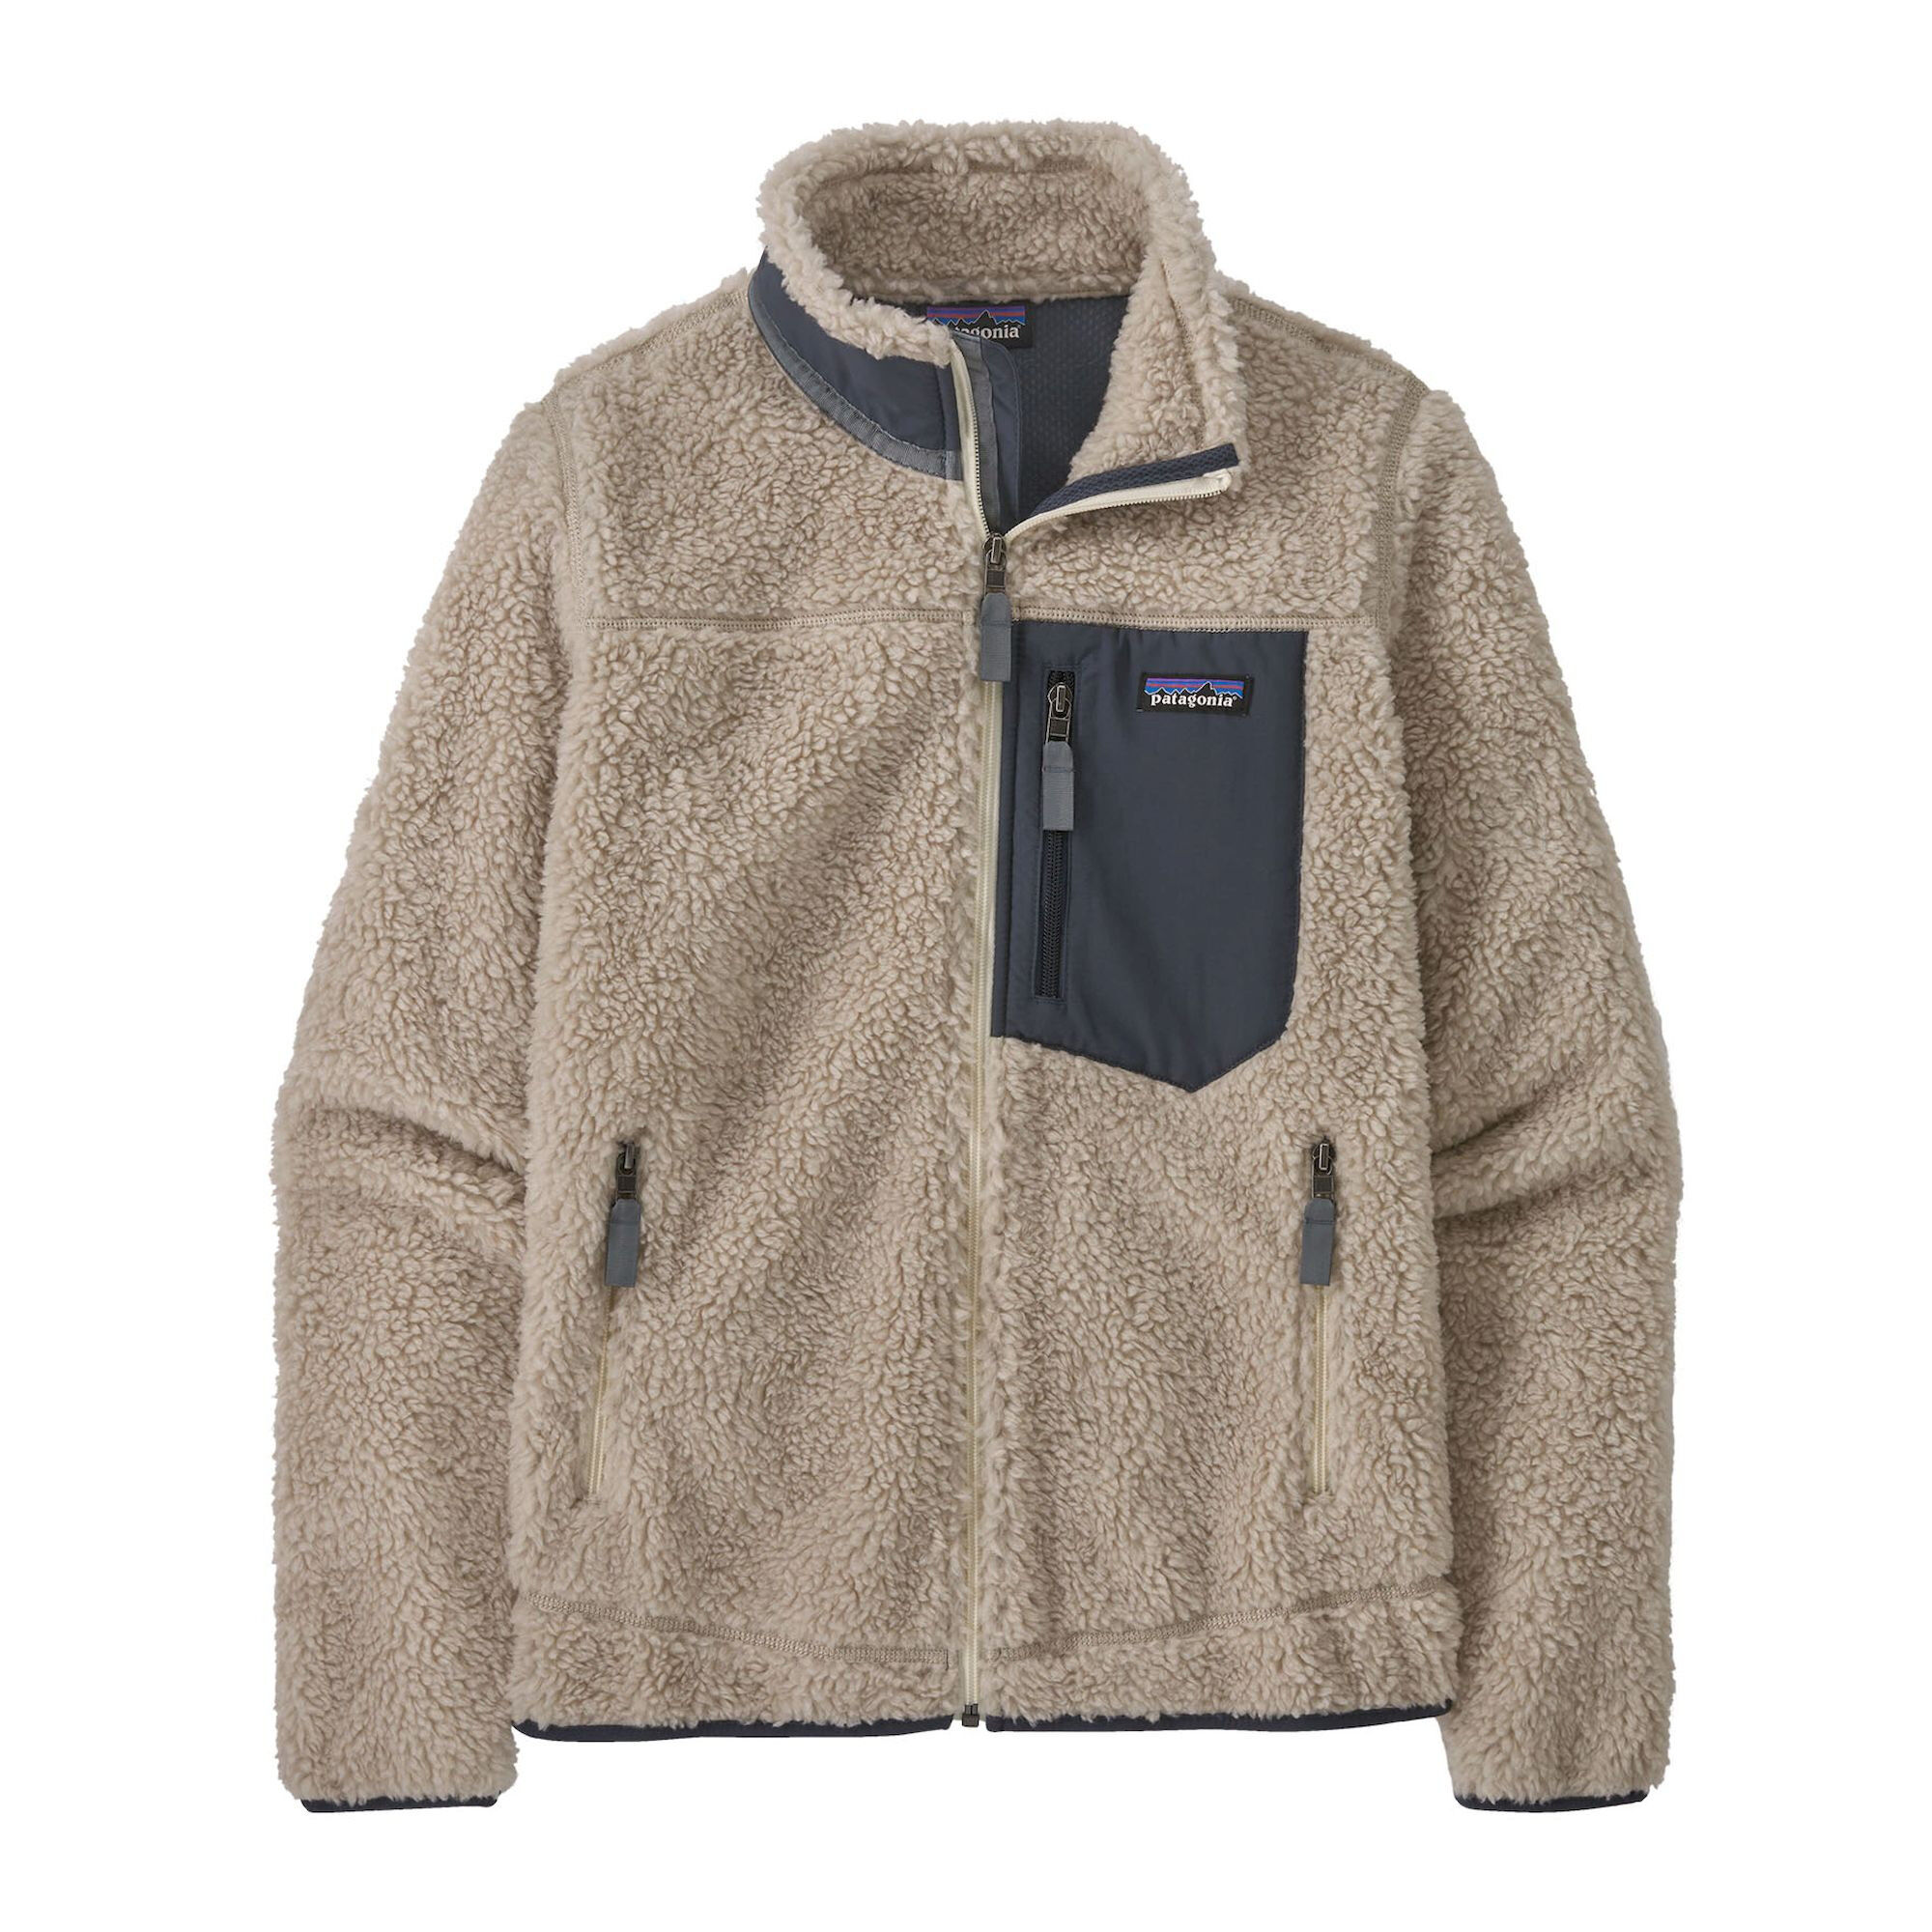 Patagonia - Classic Retro-X Jkt - Giacca in pile - Donna